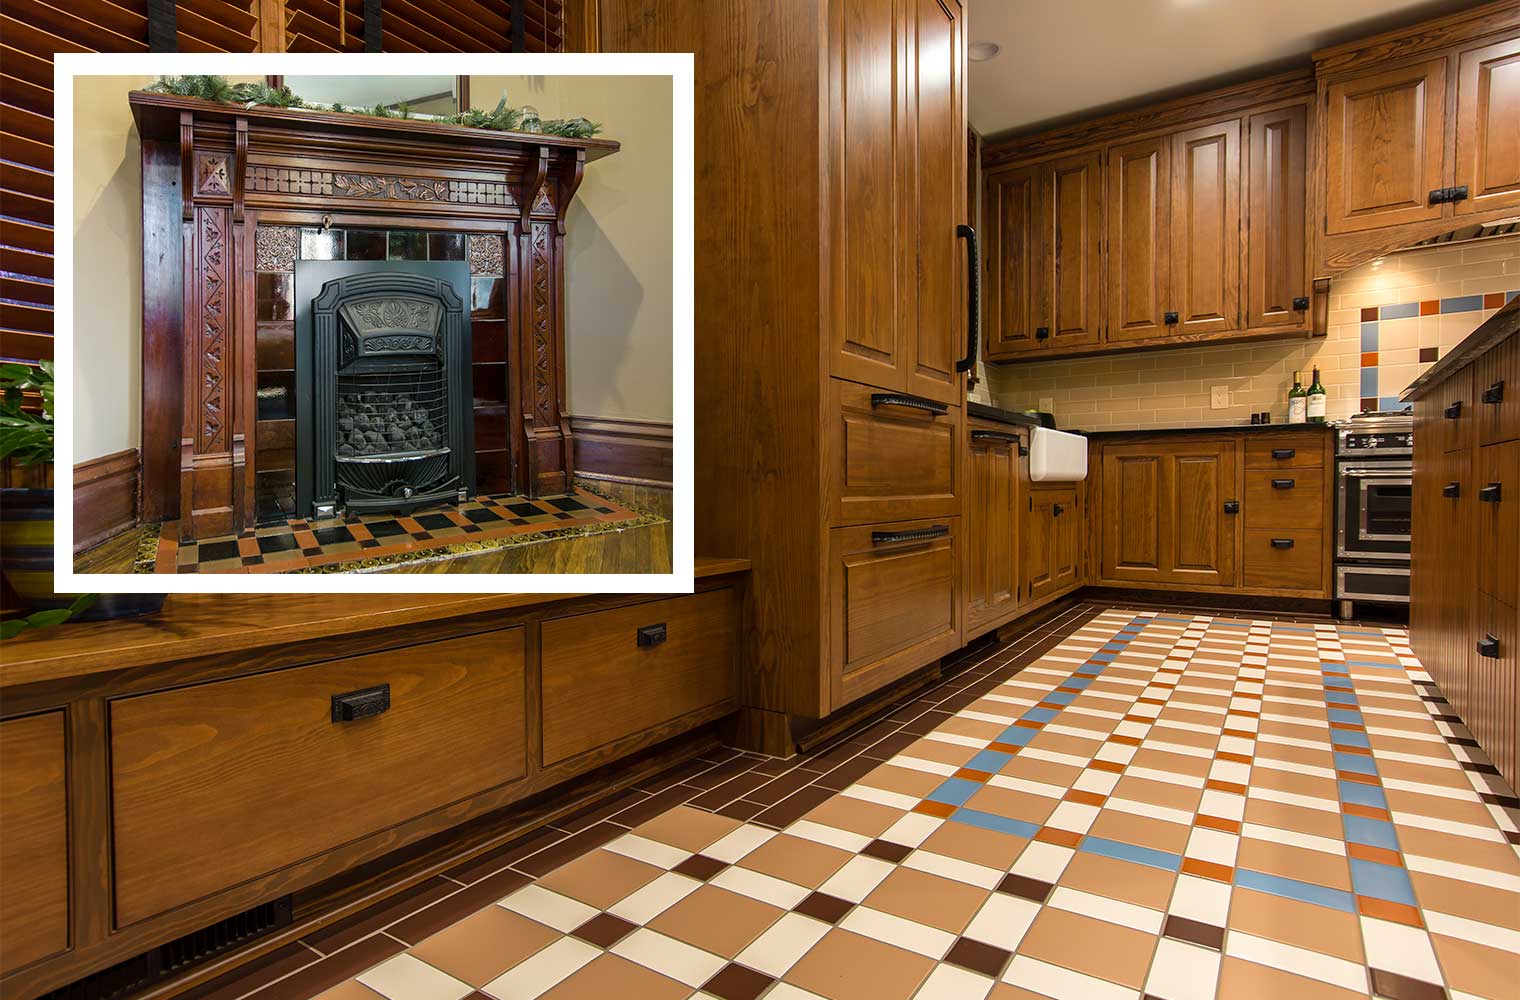 tile floor pattern in historic kitchen takes inspiration from fireplace in Victorian Des Moines home remodel by Silent Rivers